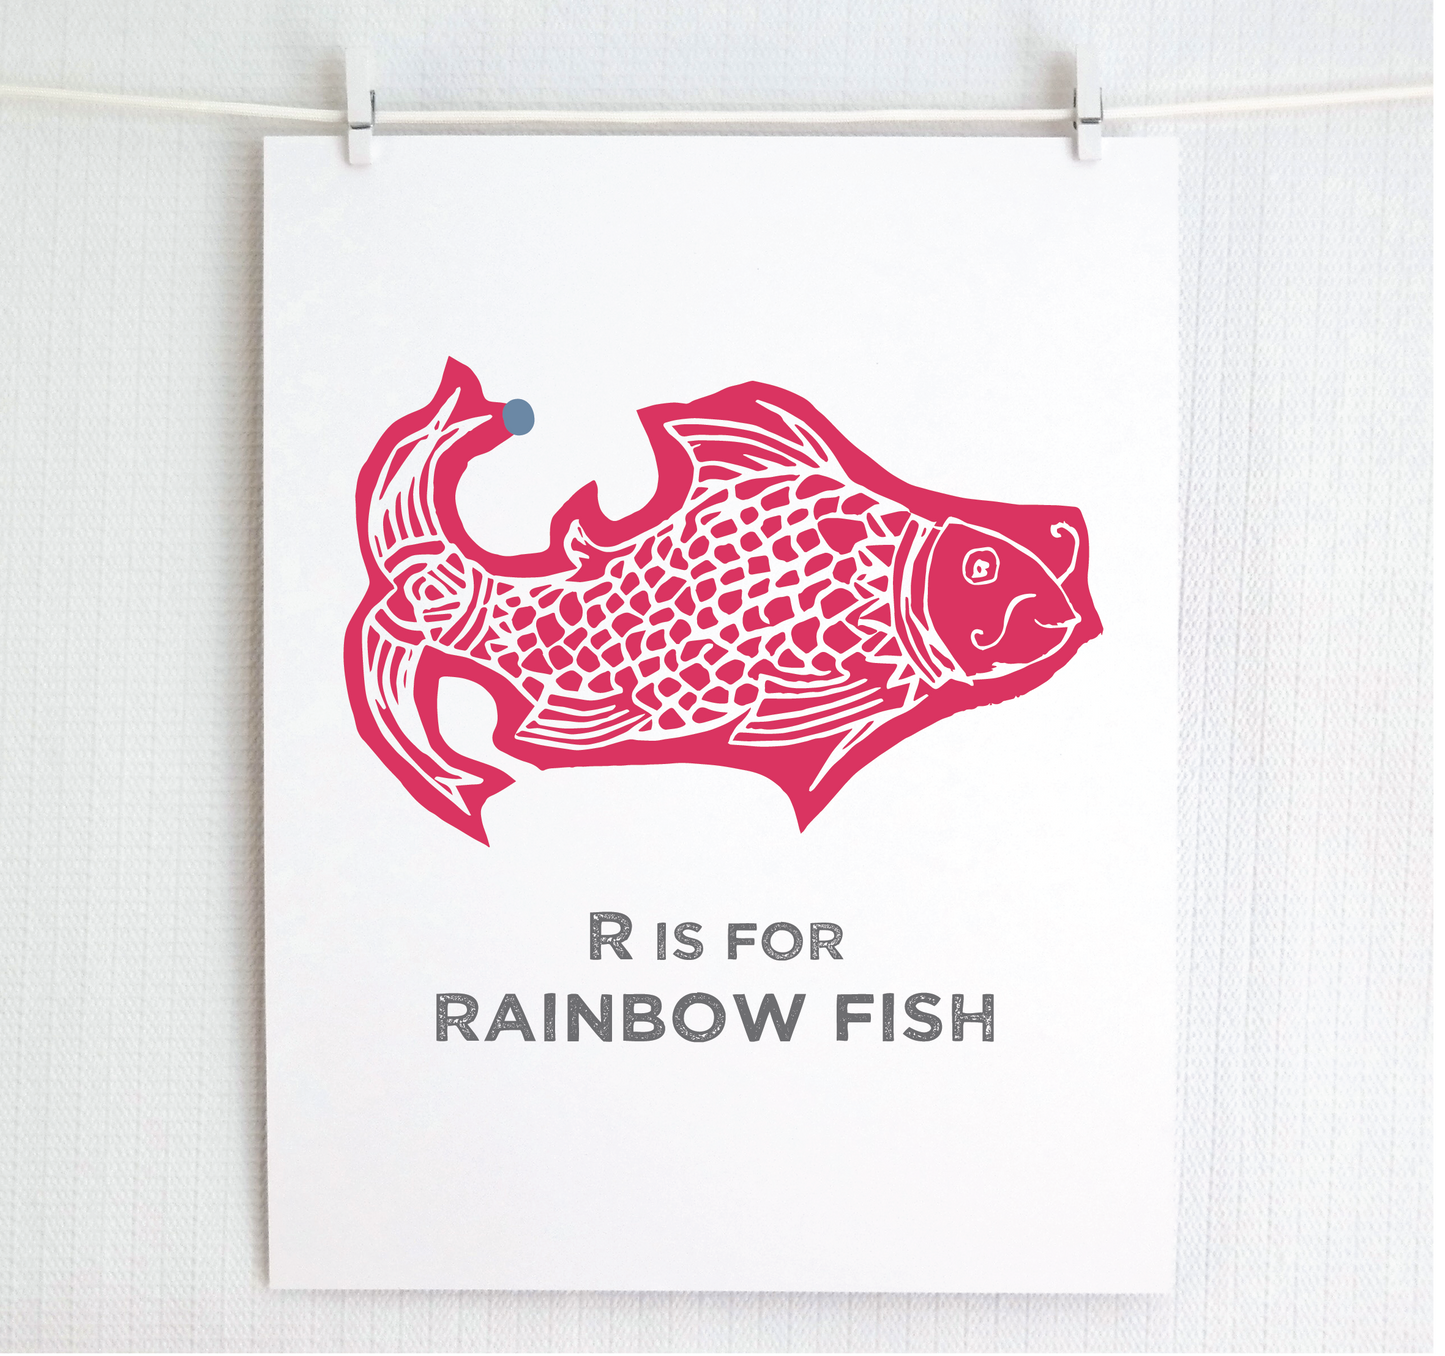 R is for Rainbow Fish